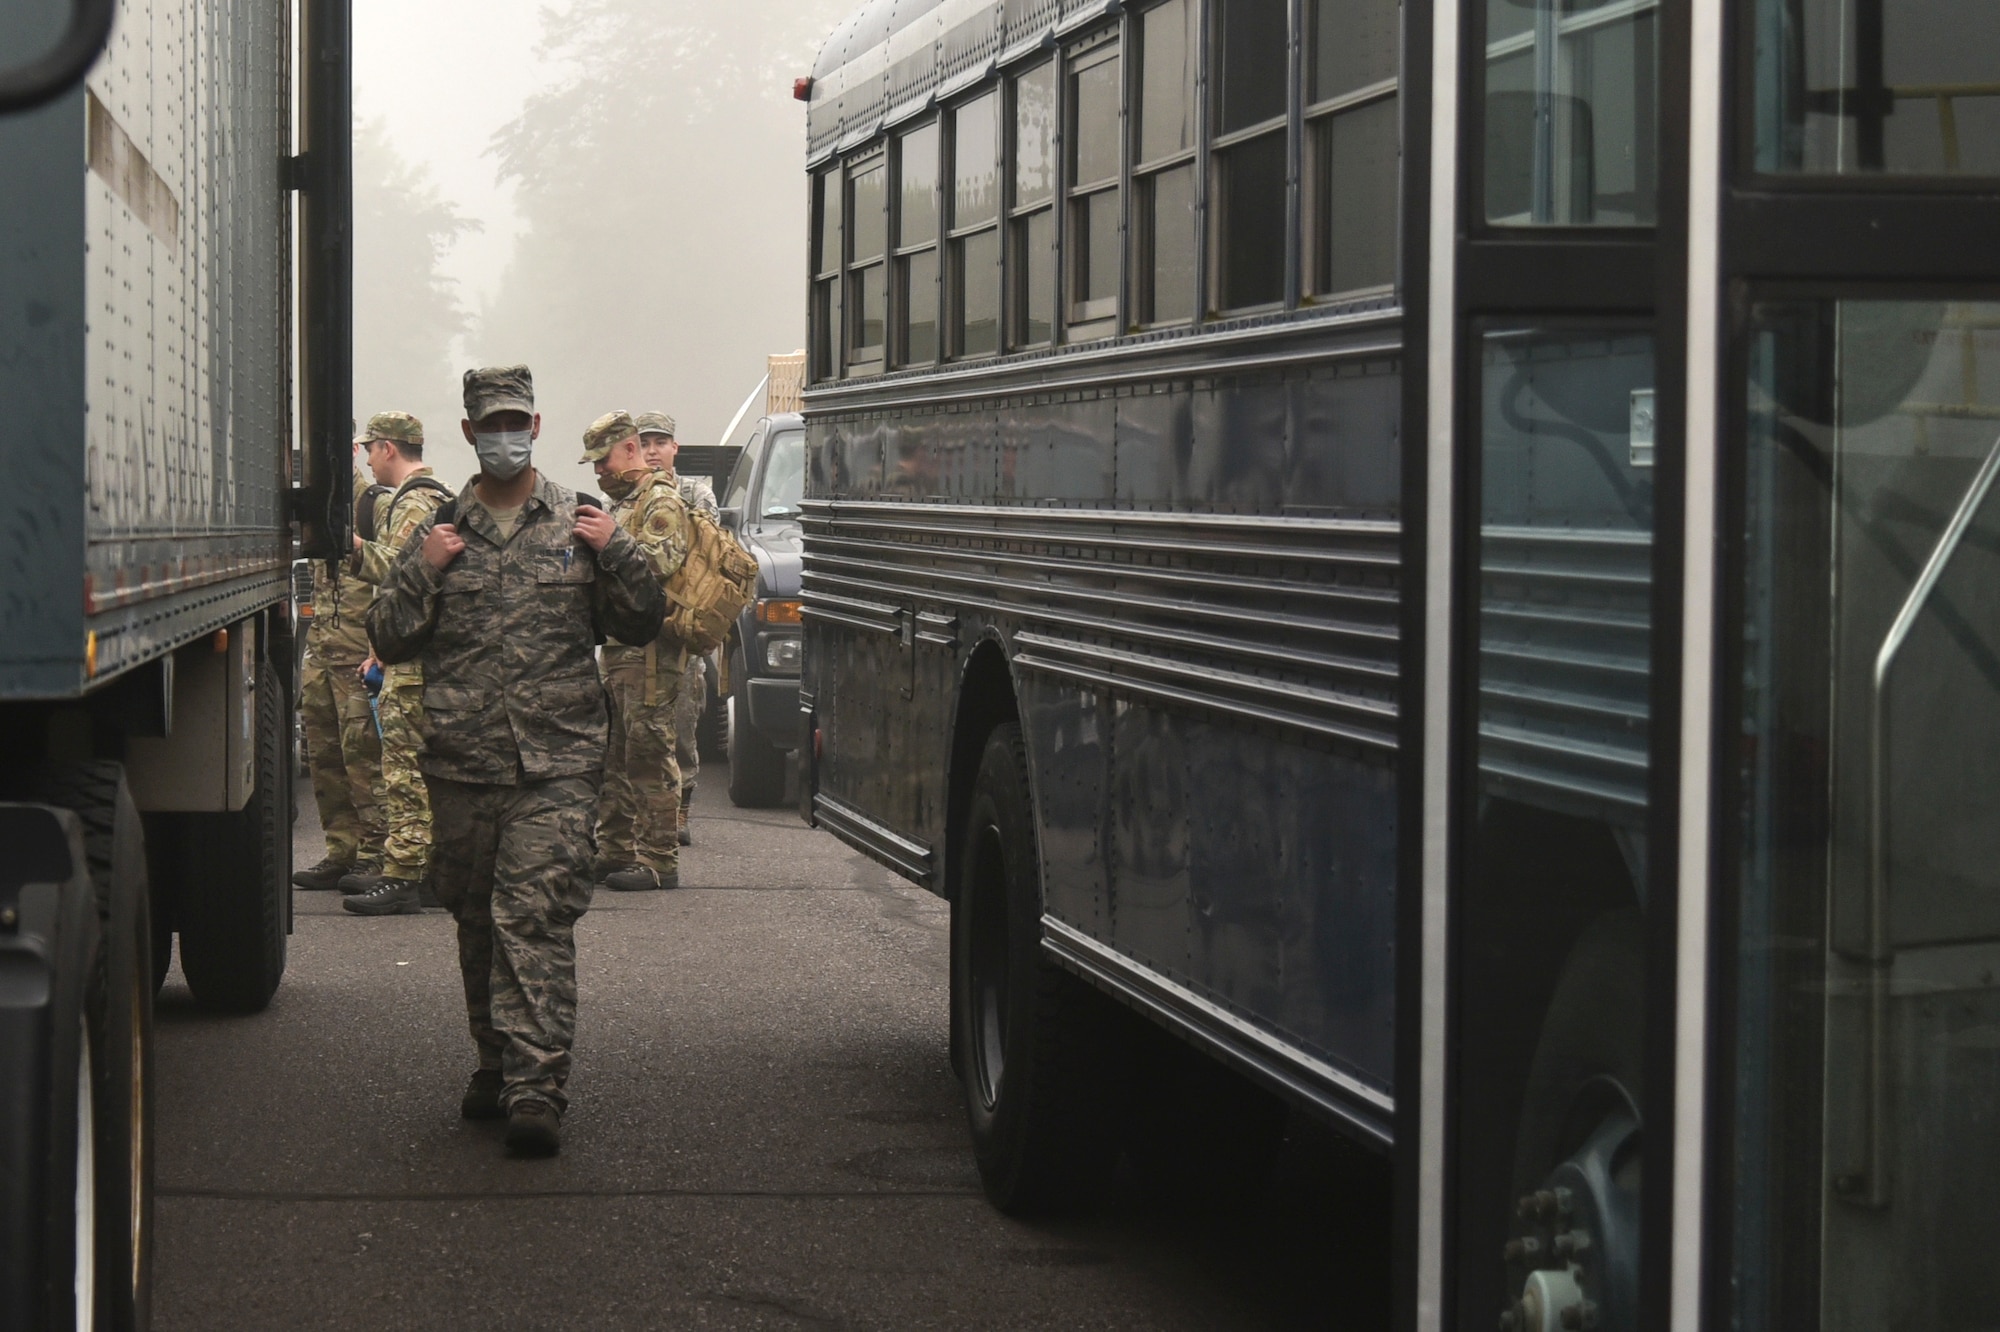 Oregon Air National Guard members from the 142nd Wing load busses before leaving from the Portland Air National Guard Base, Portland, Ore., Sept. 13, 2020, in support of Operation Plan Smokey. The Airmen previously received training to be ready to provide wildfire relief efforts in a moment’s notice. (U.S. Air National Guard photo by Senior Airman Valerie R. Seelye)